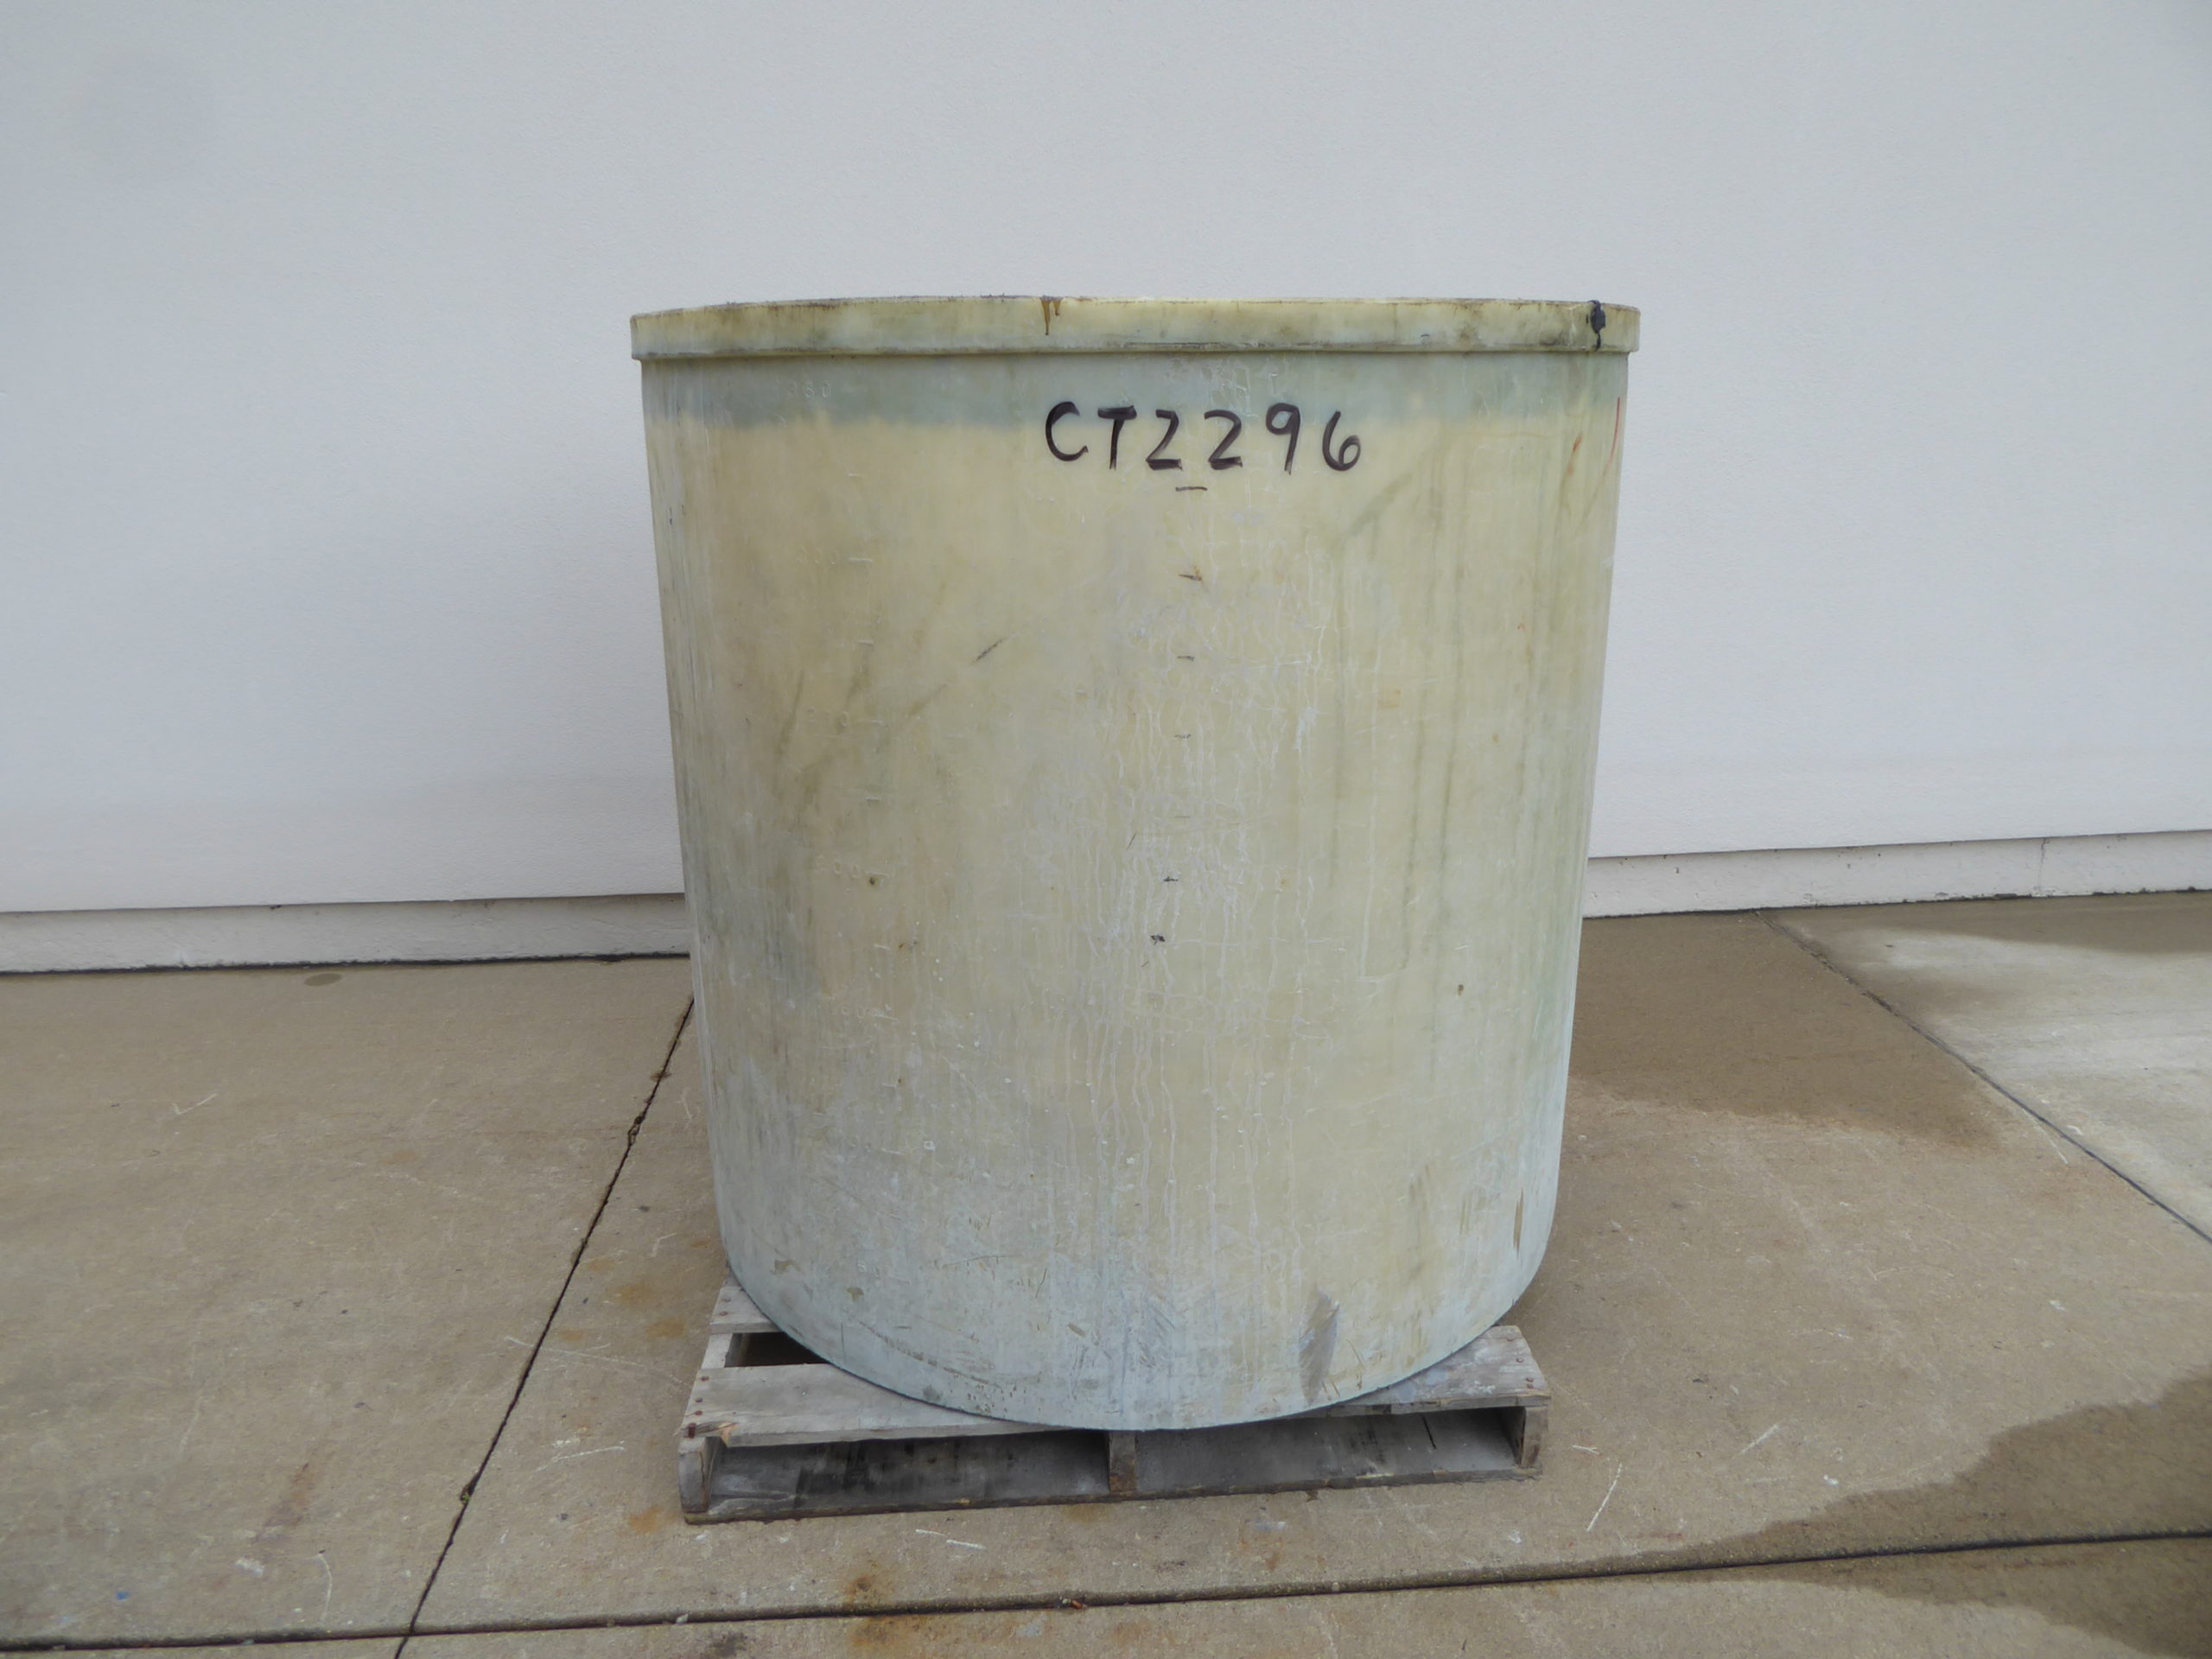 Used Cylindrical Tank - 350 Gallon Poly Round Tank CT2296-Tanks-Cylindrical